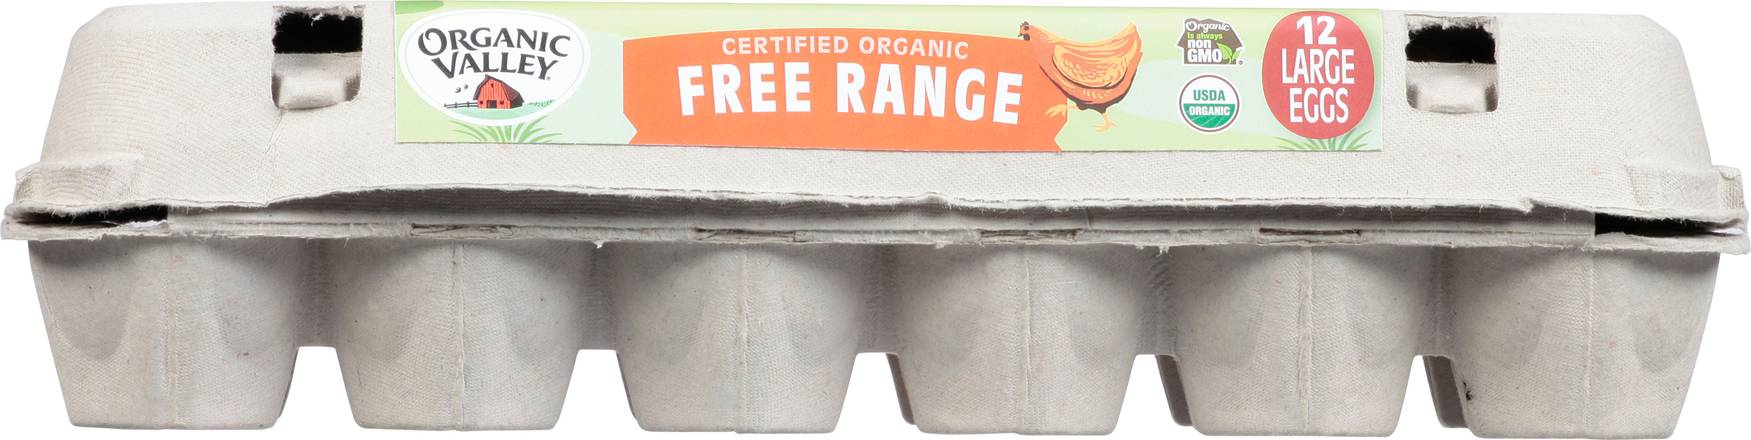 Organic Valley Brown Large Eggs (12 ct)